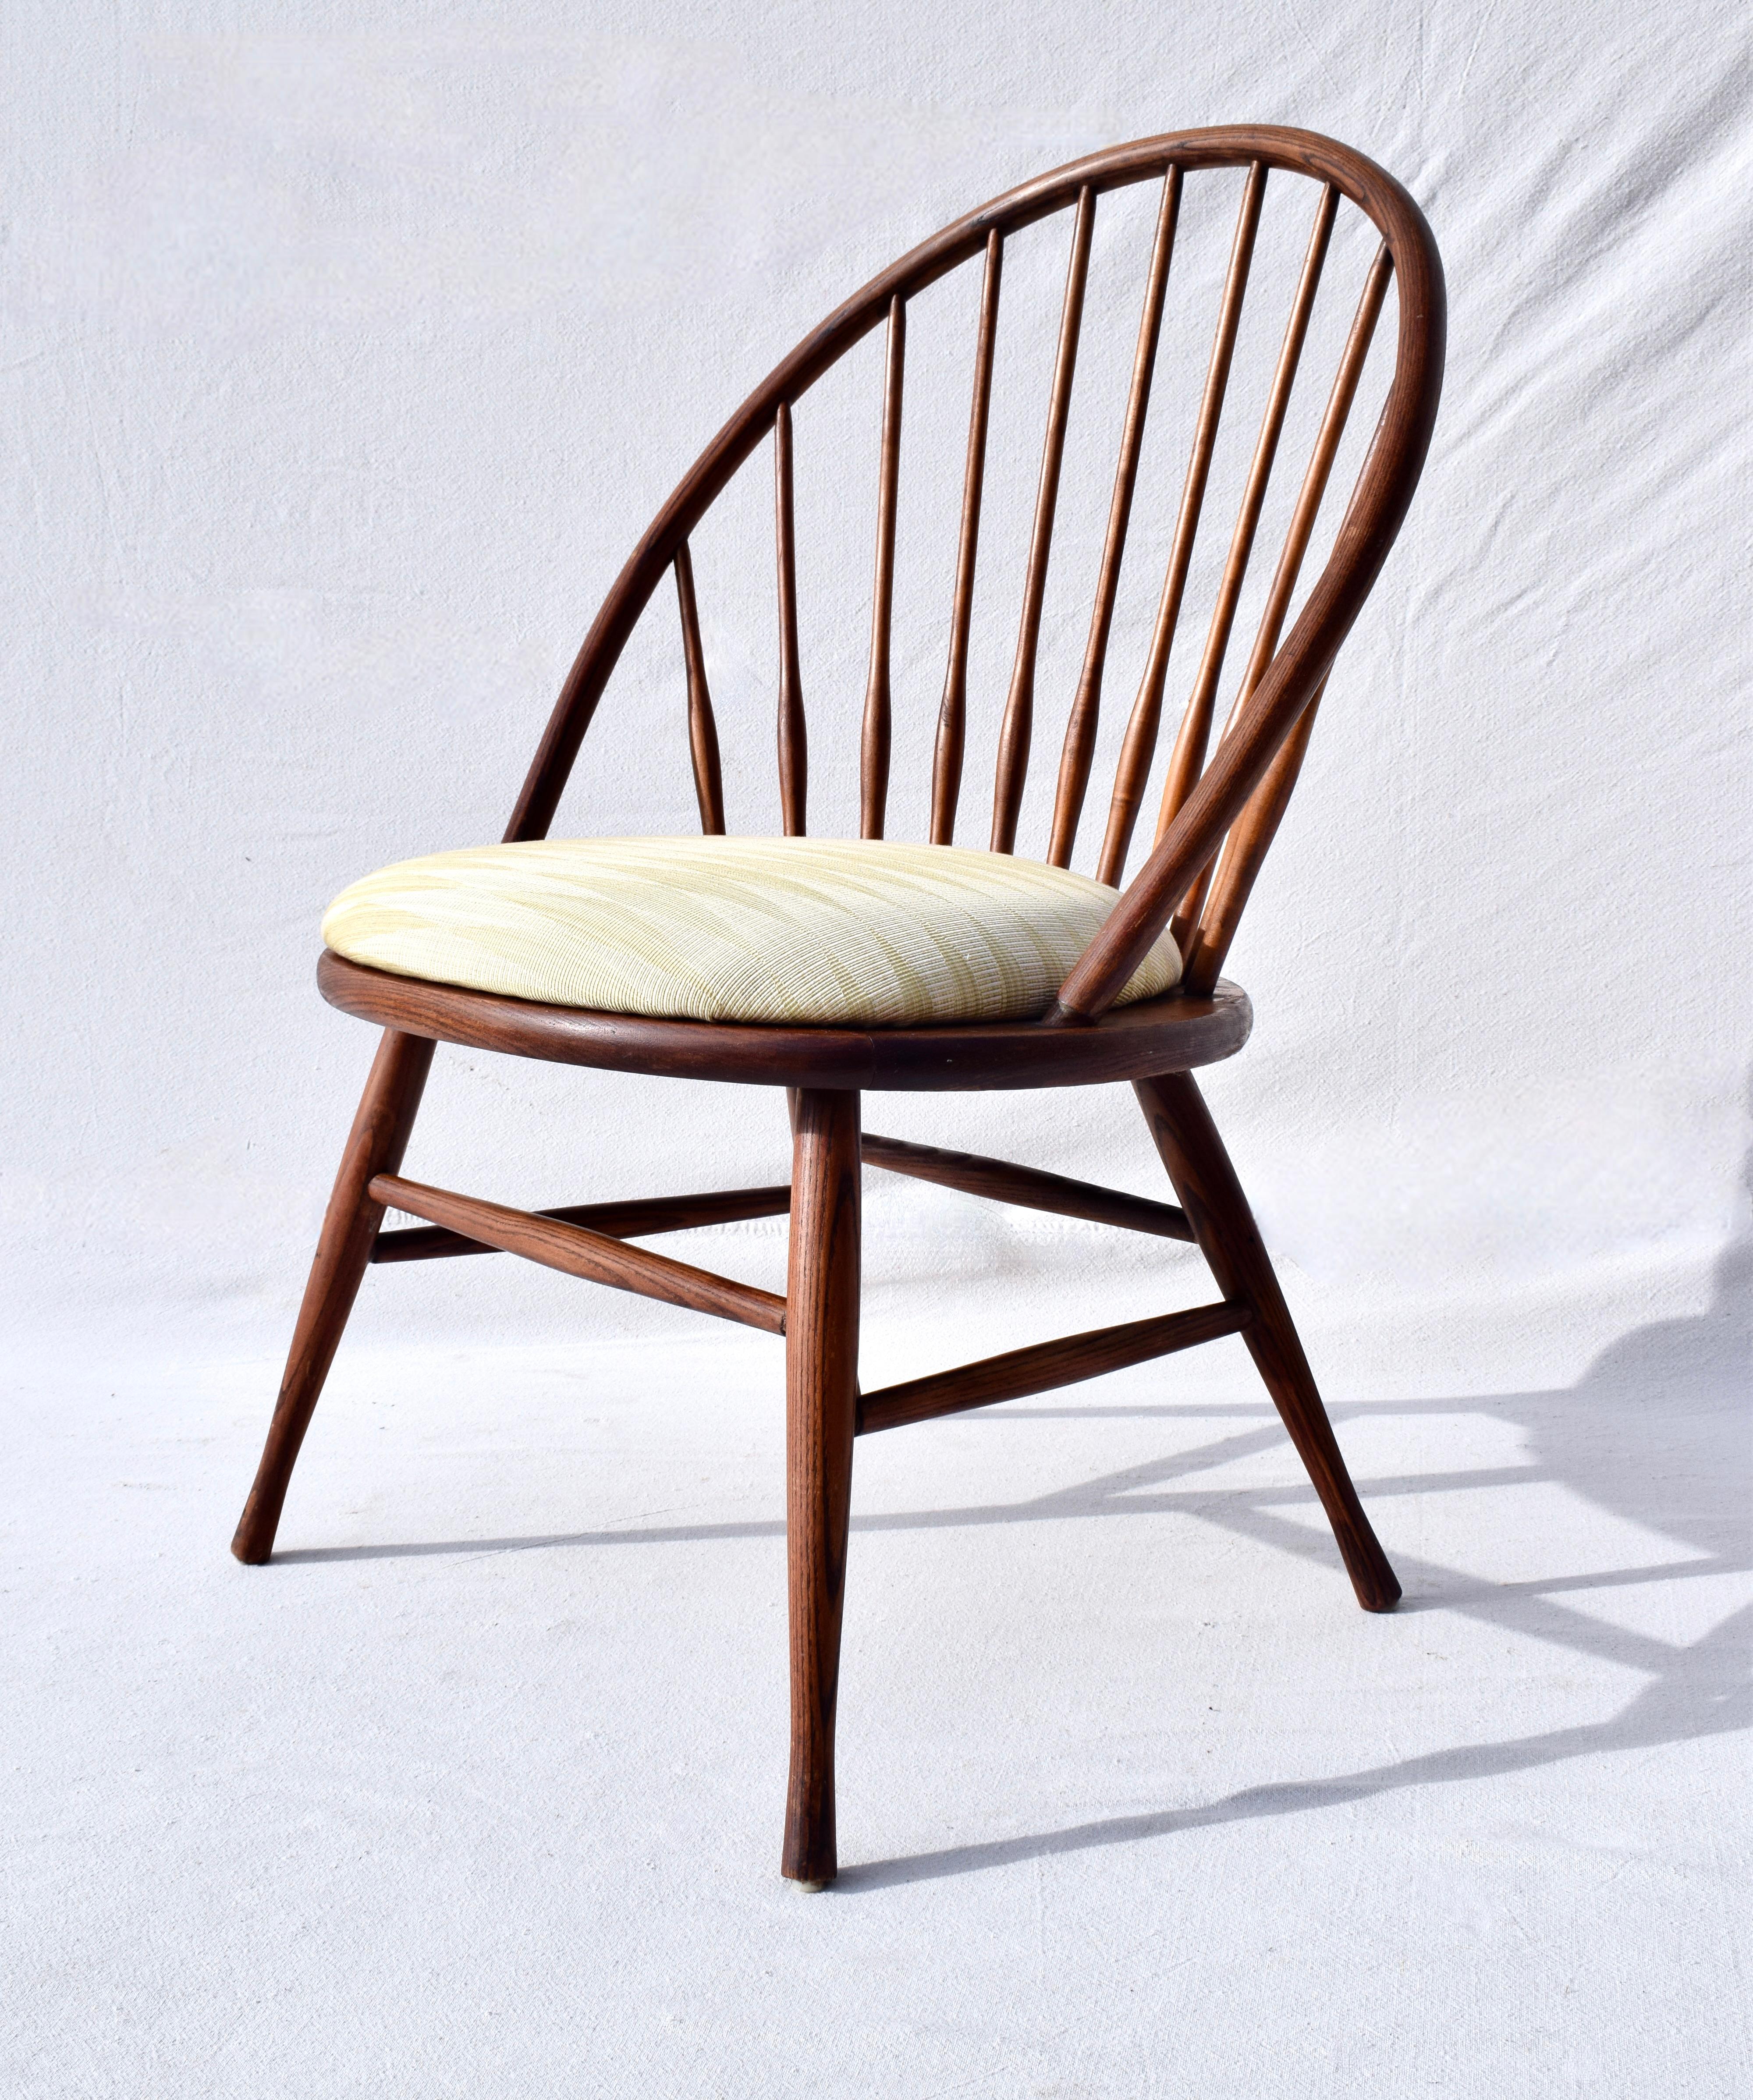 A modern interpretation of the Classic Windsor chair form, in solid Oak, made in Sweden. Very clean, original condition newly upholstered with proportions that work well in a variety of settings., ready to use. Attributed to Yngve Ekstrom, unsigned.